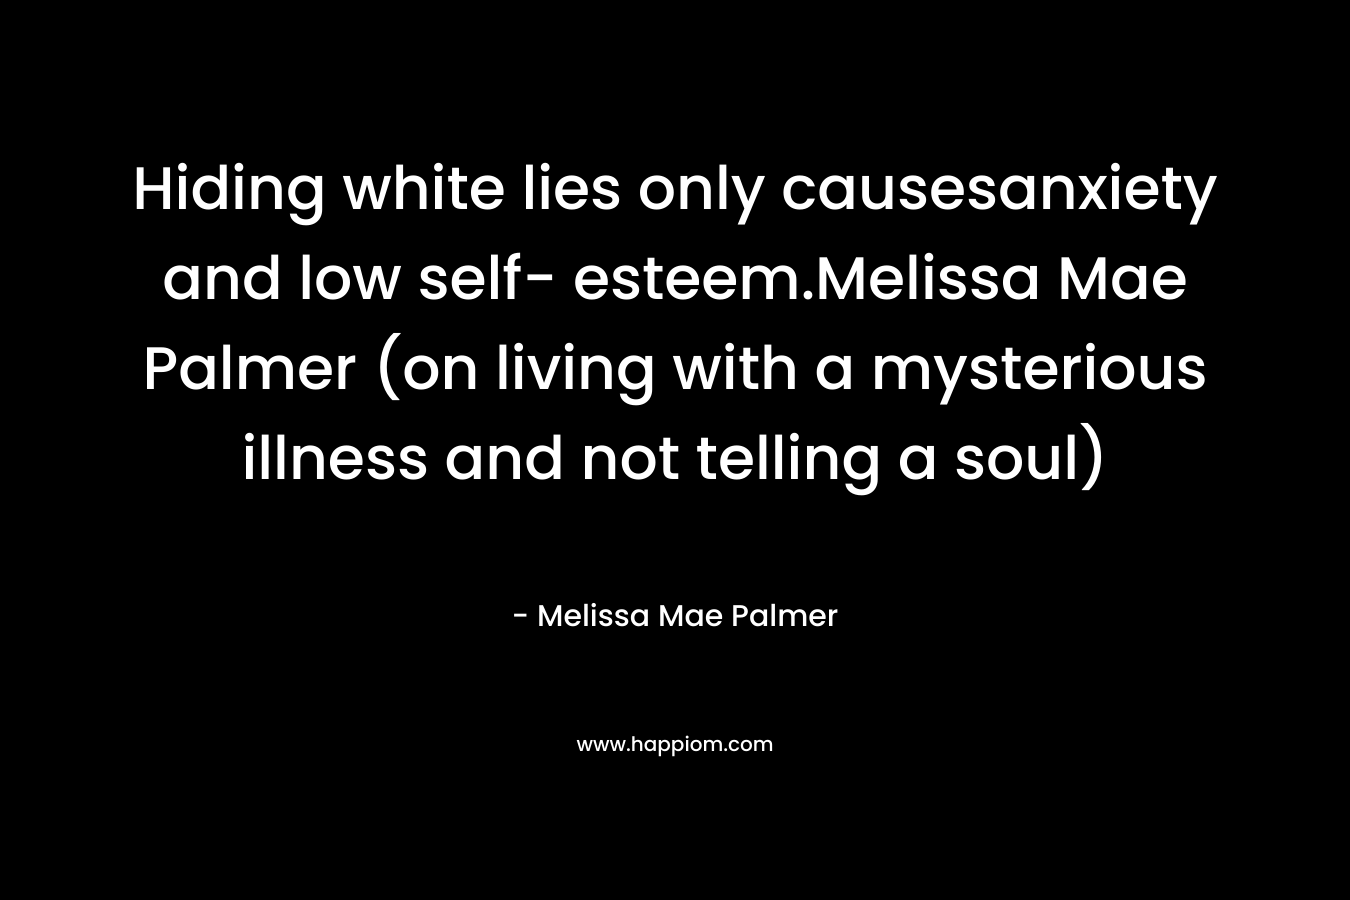 Hiding white lies only causesanxiety and low self- esteem.Melissa Mae Palmer (on living with a mysterious illness and not telling a soul) – Melissa Mae Palmer